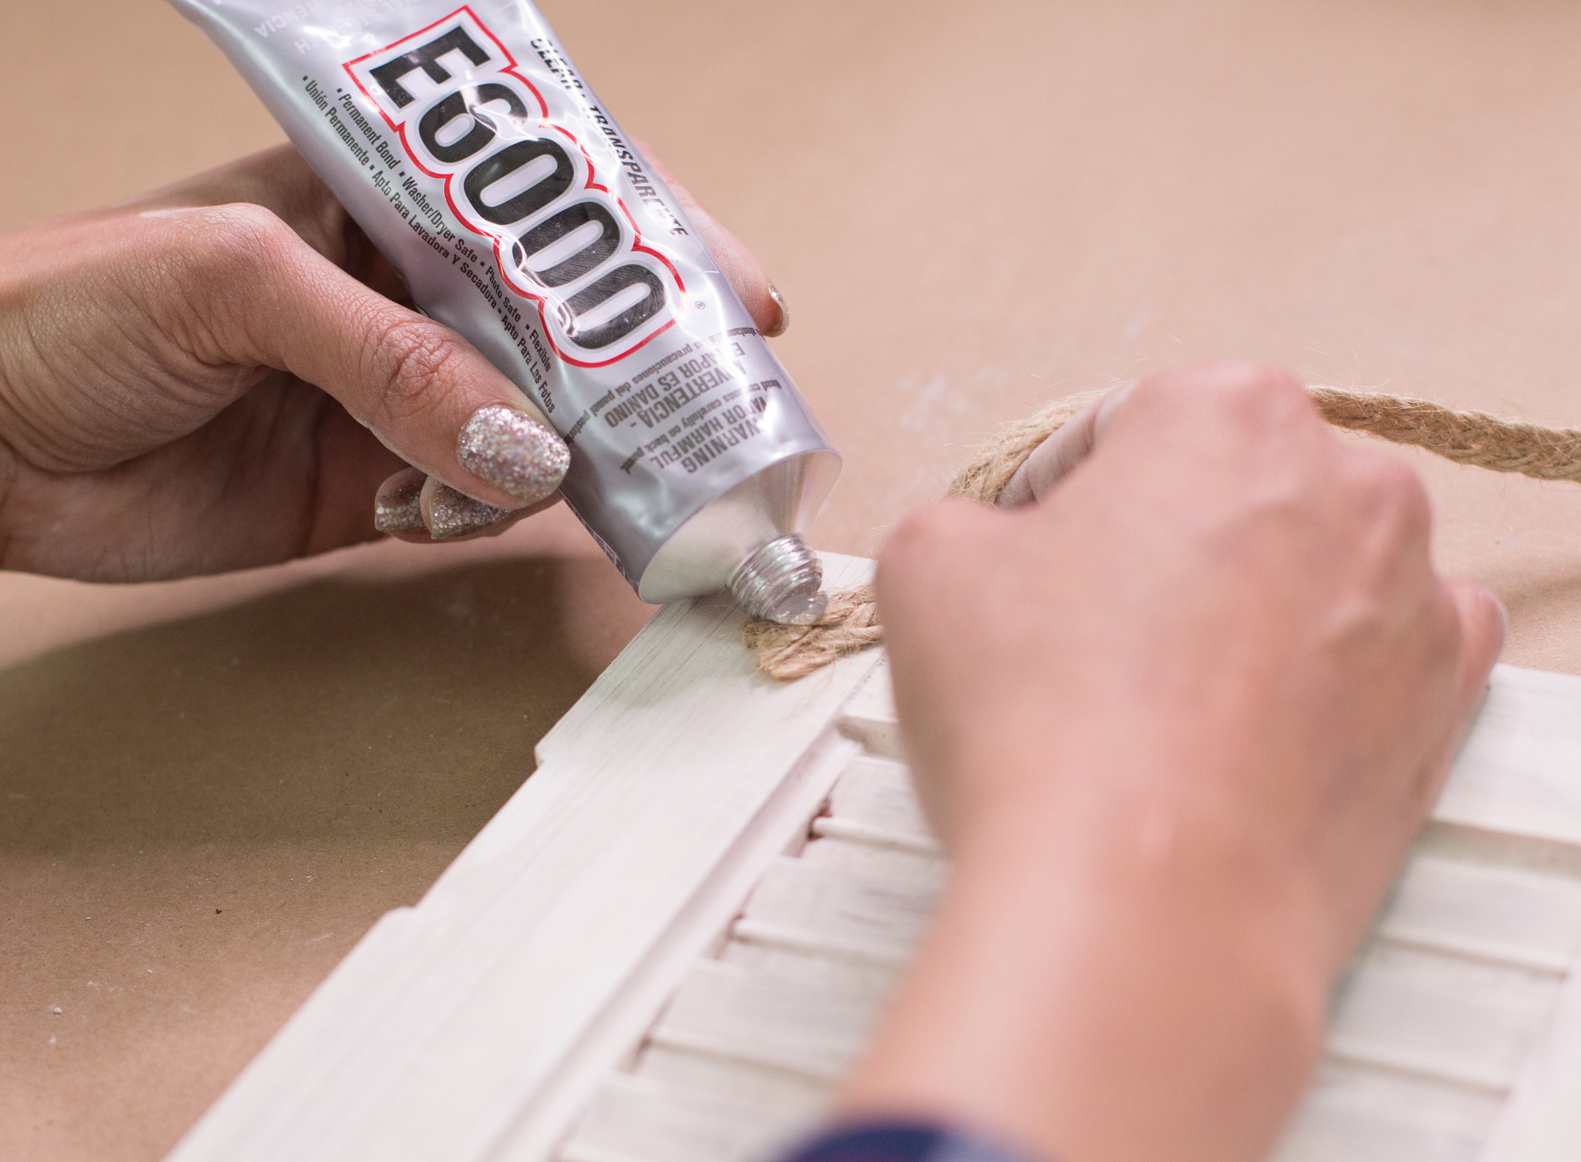 Eclectic E6000 Adhesive Glue, Industrial Strenght, Clear, 3 fl. Oz. - image 4 of 8